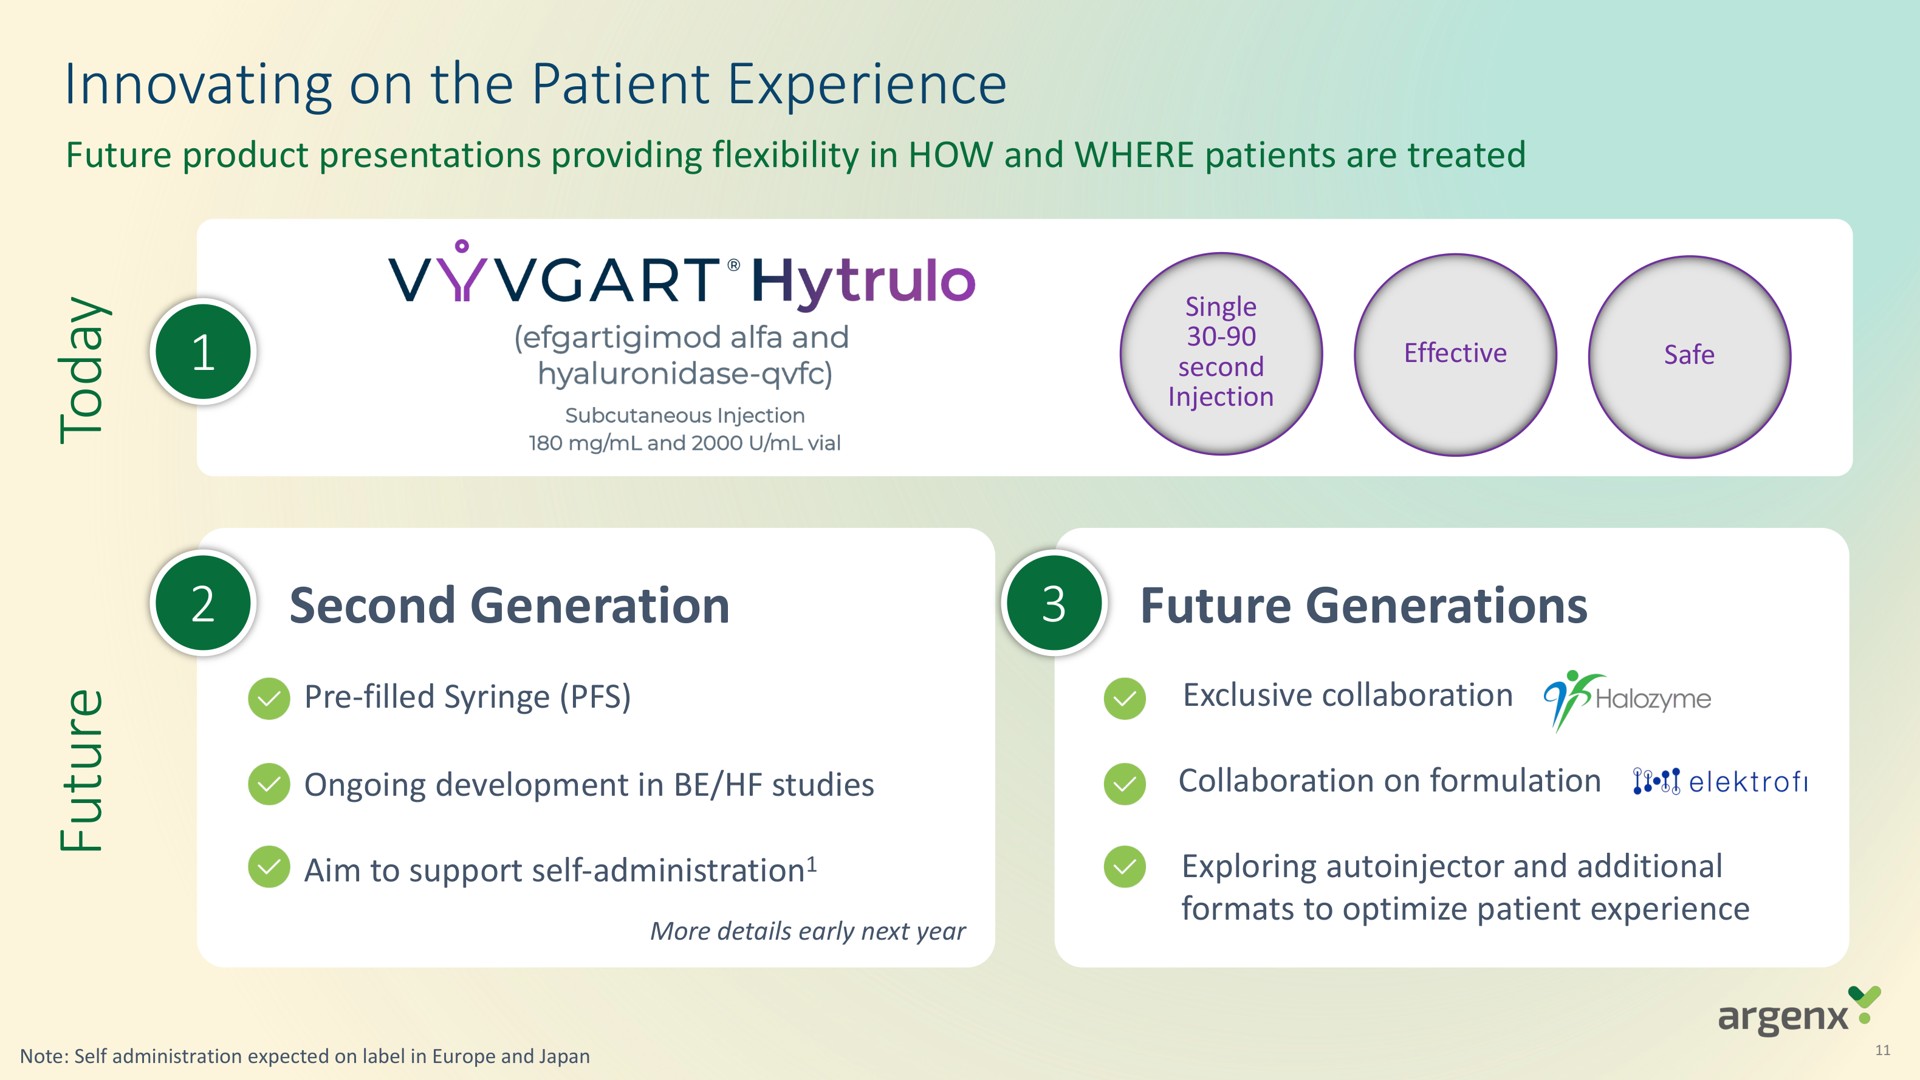 innovating on the patient experience second generation future generations | argenx SE